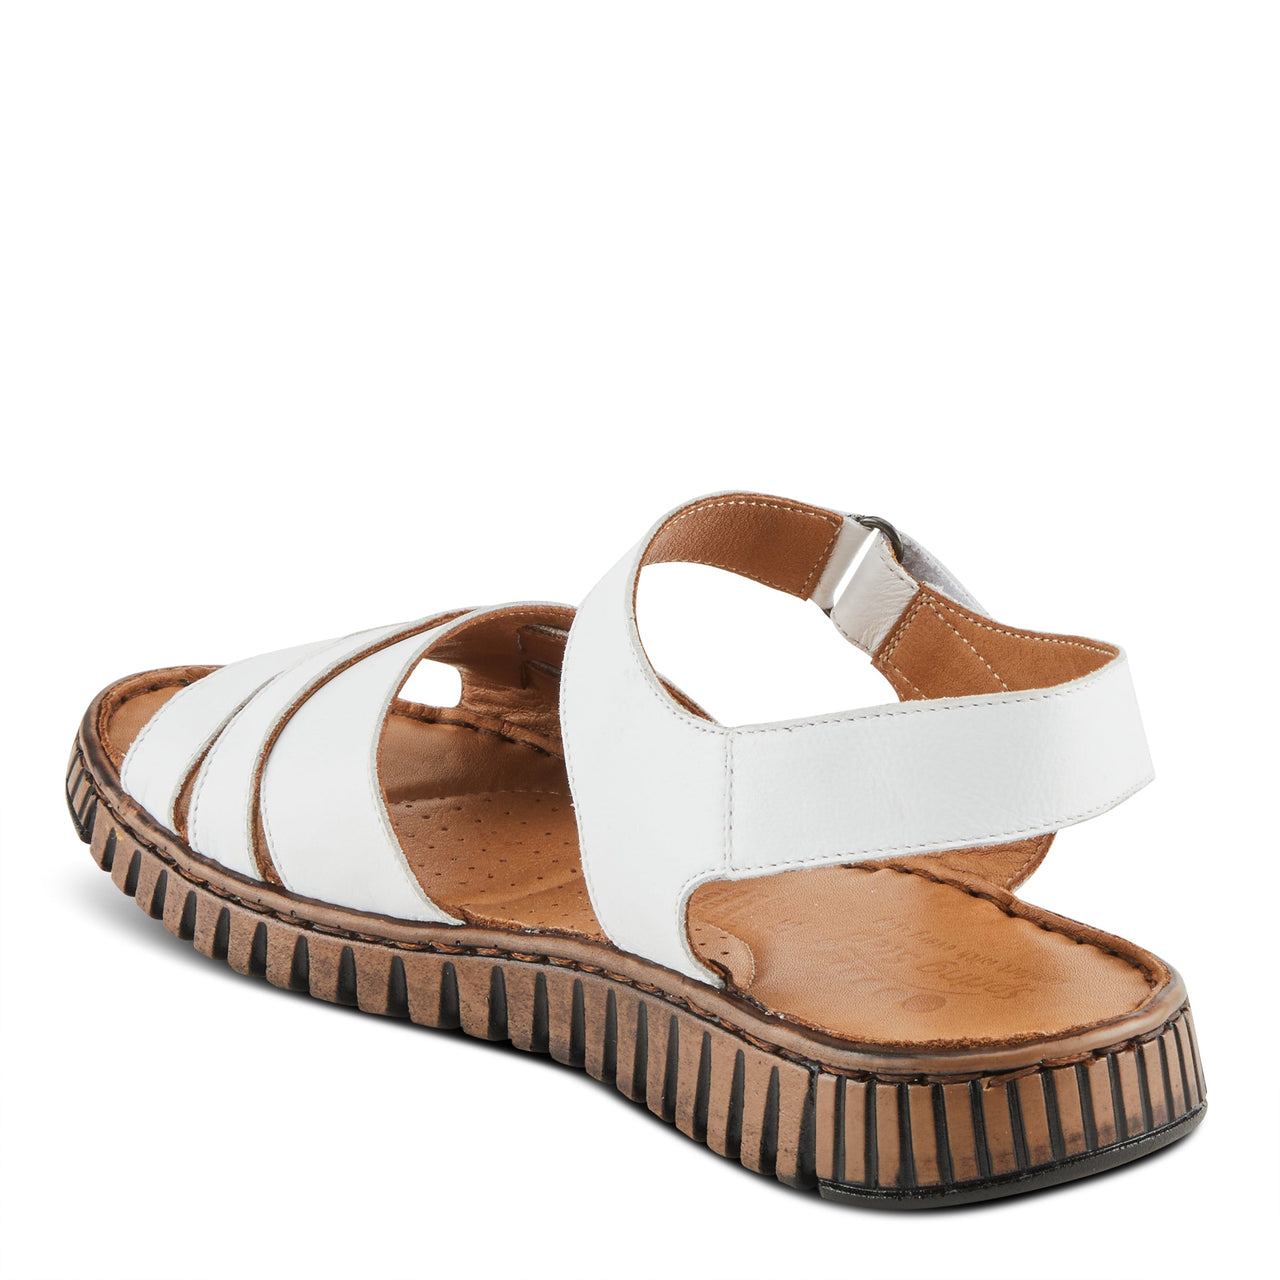 Brown leather Spring Step Nochella Sandals with adjustable straps and cushioned insoles for all-day comfort